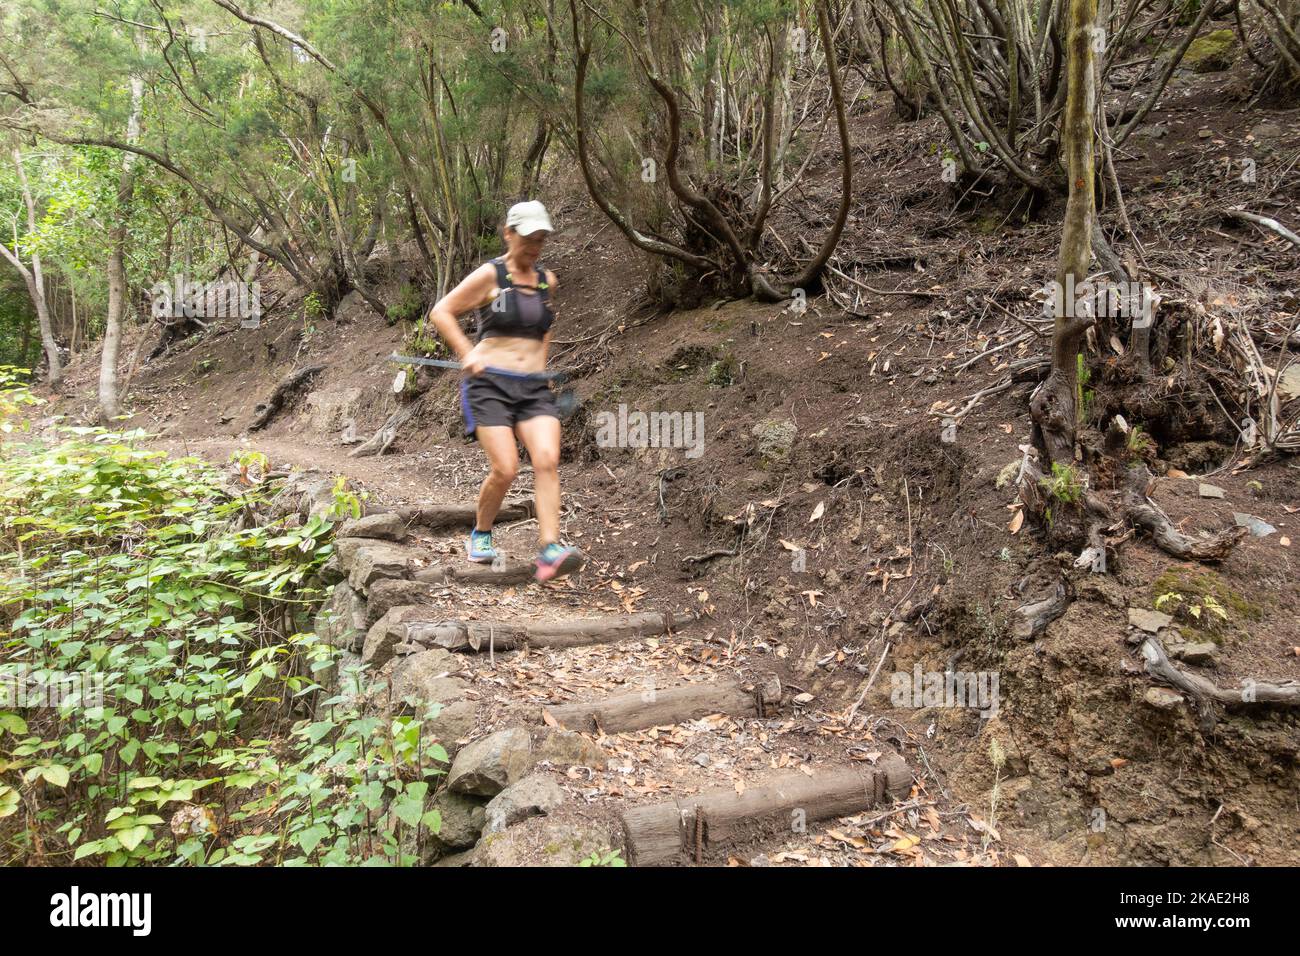 Mature woman trail runner, running in forest. Stock Photo